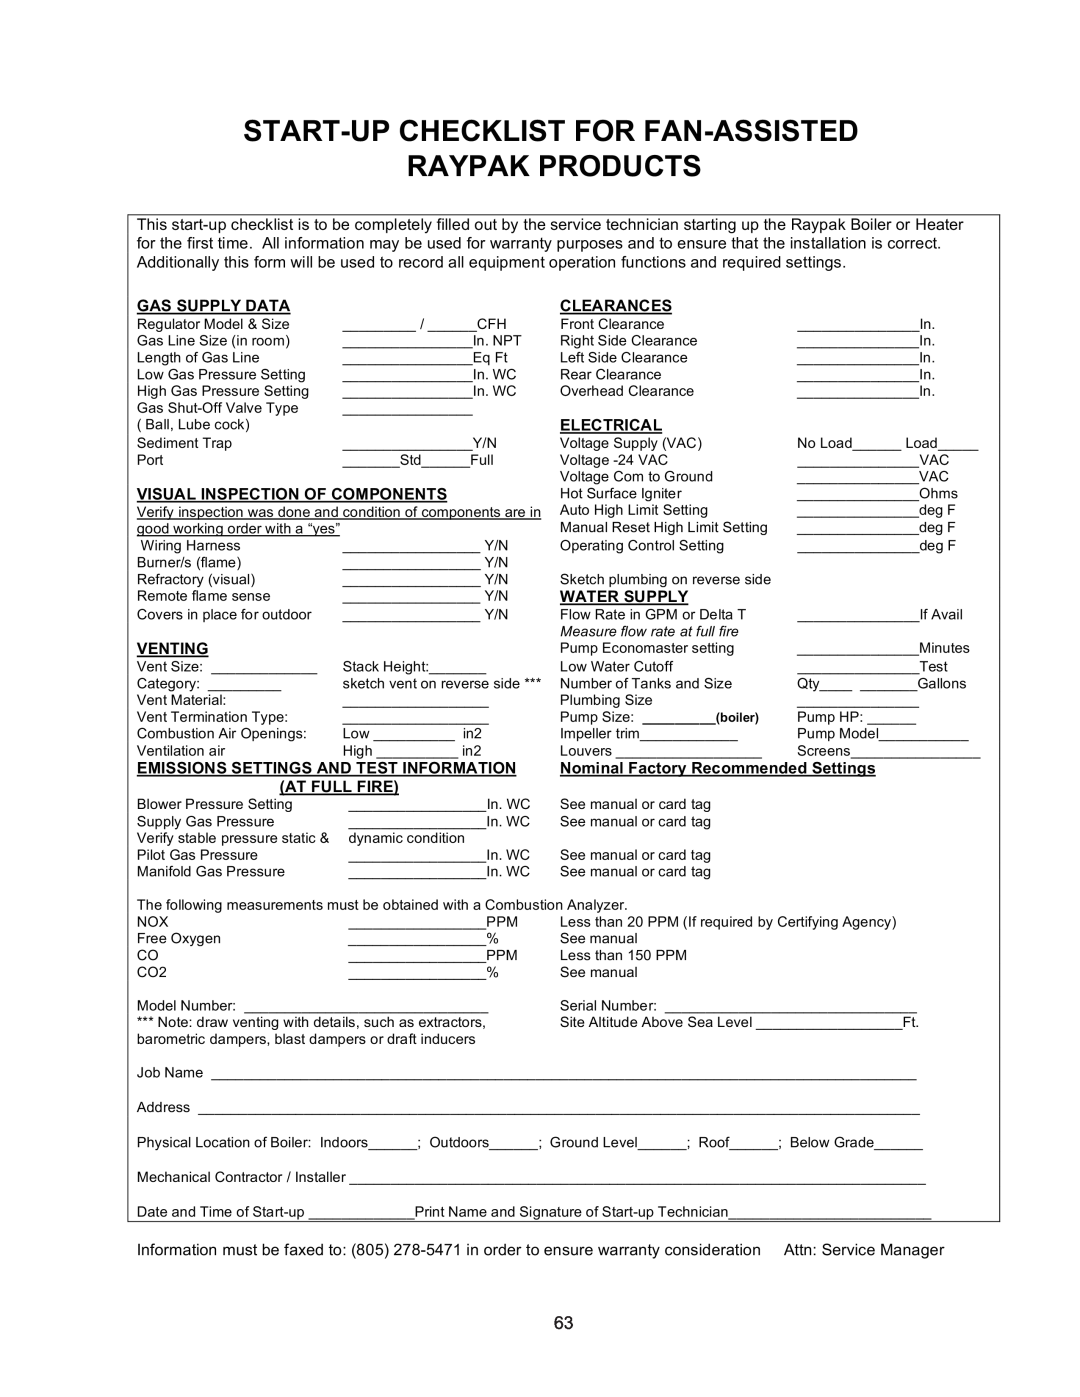 Raypak 992B-1262B Start-Upchecklist For Fan-Assisted, Raypak Products, Gas Supply Data, Clearances, Electrical, Venting 